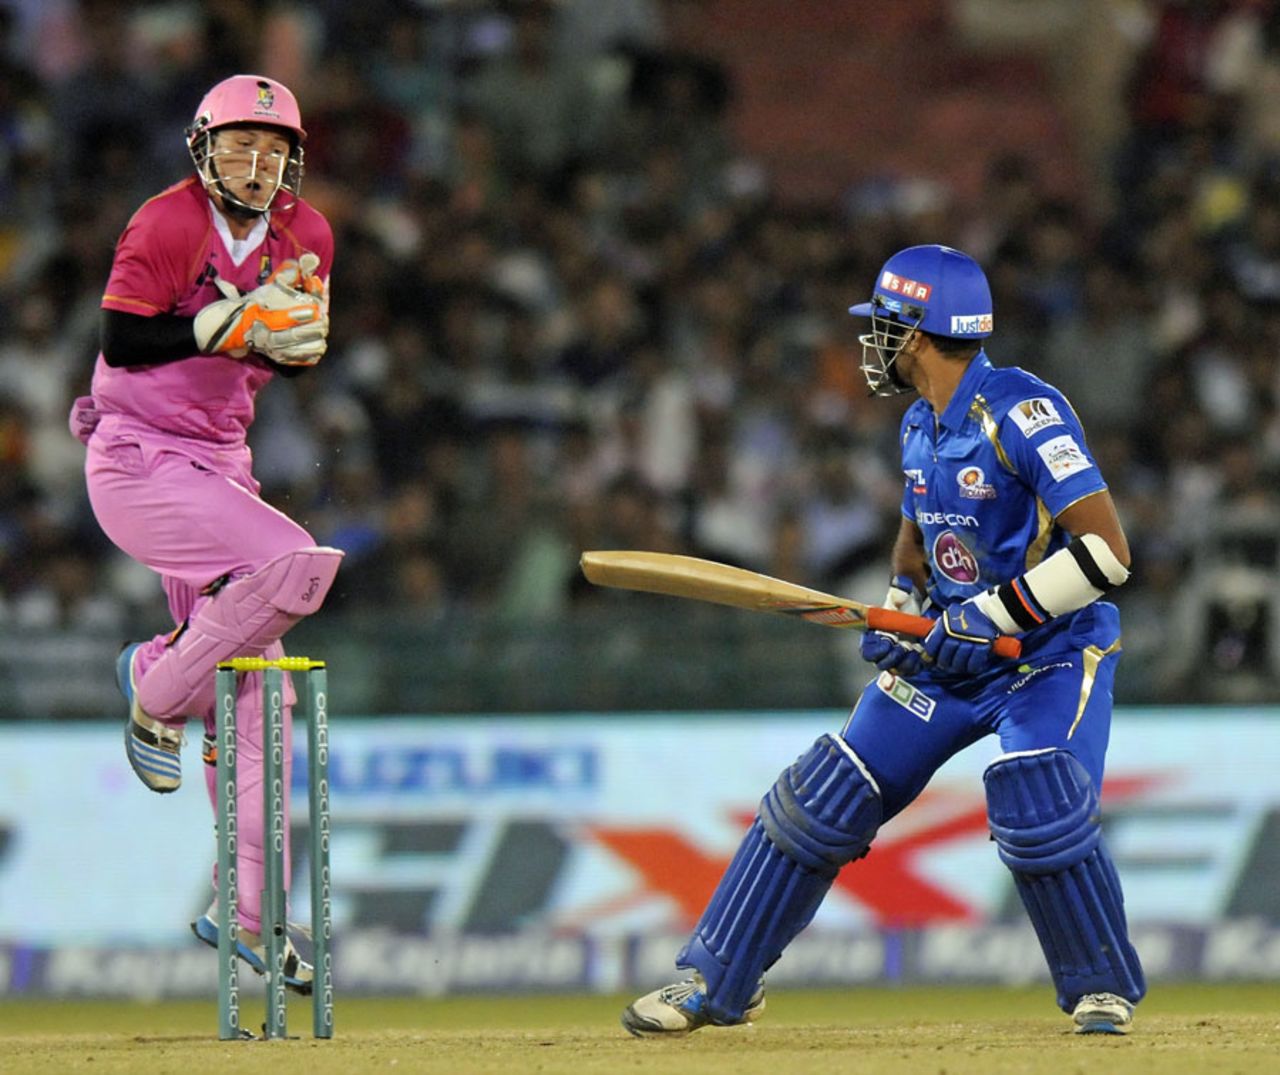 BJ Watling clings on to a catch to dismiss Aditya Tare, Mumbai Indians v Northern Knights, CLT20 qualifier, Raipur, September 16, 2014